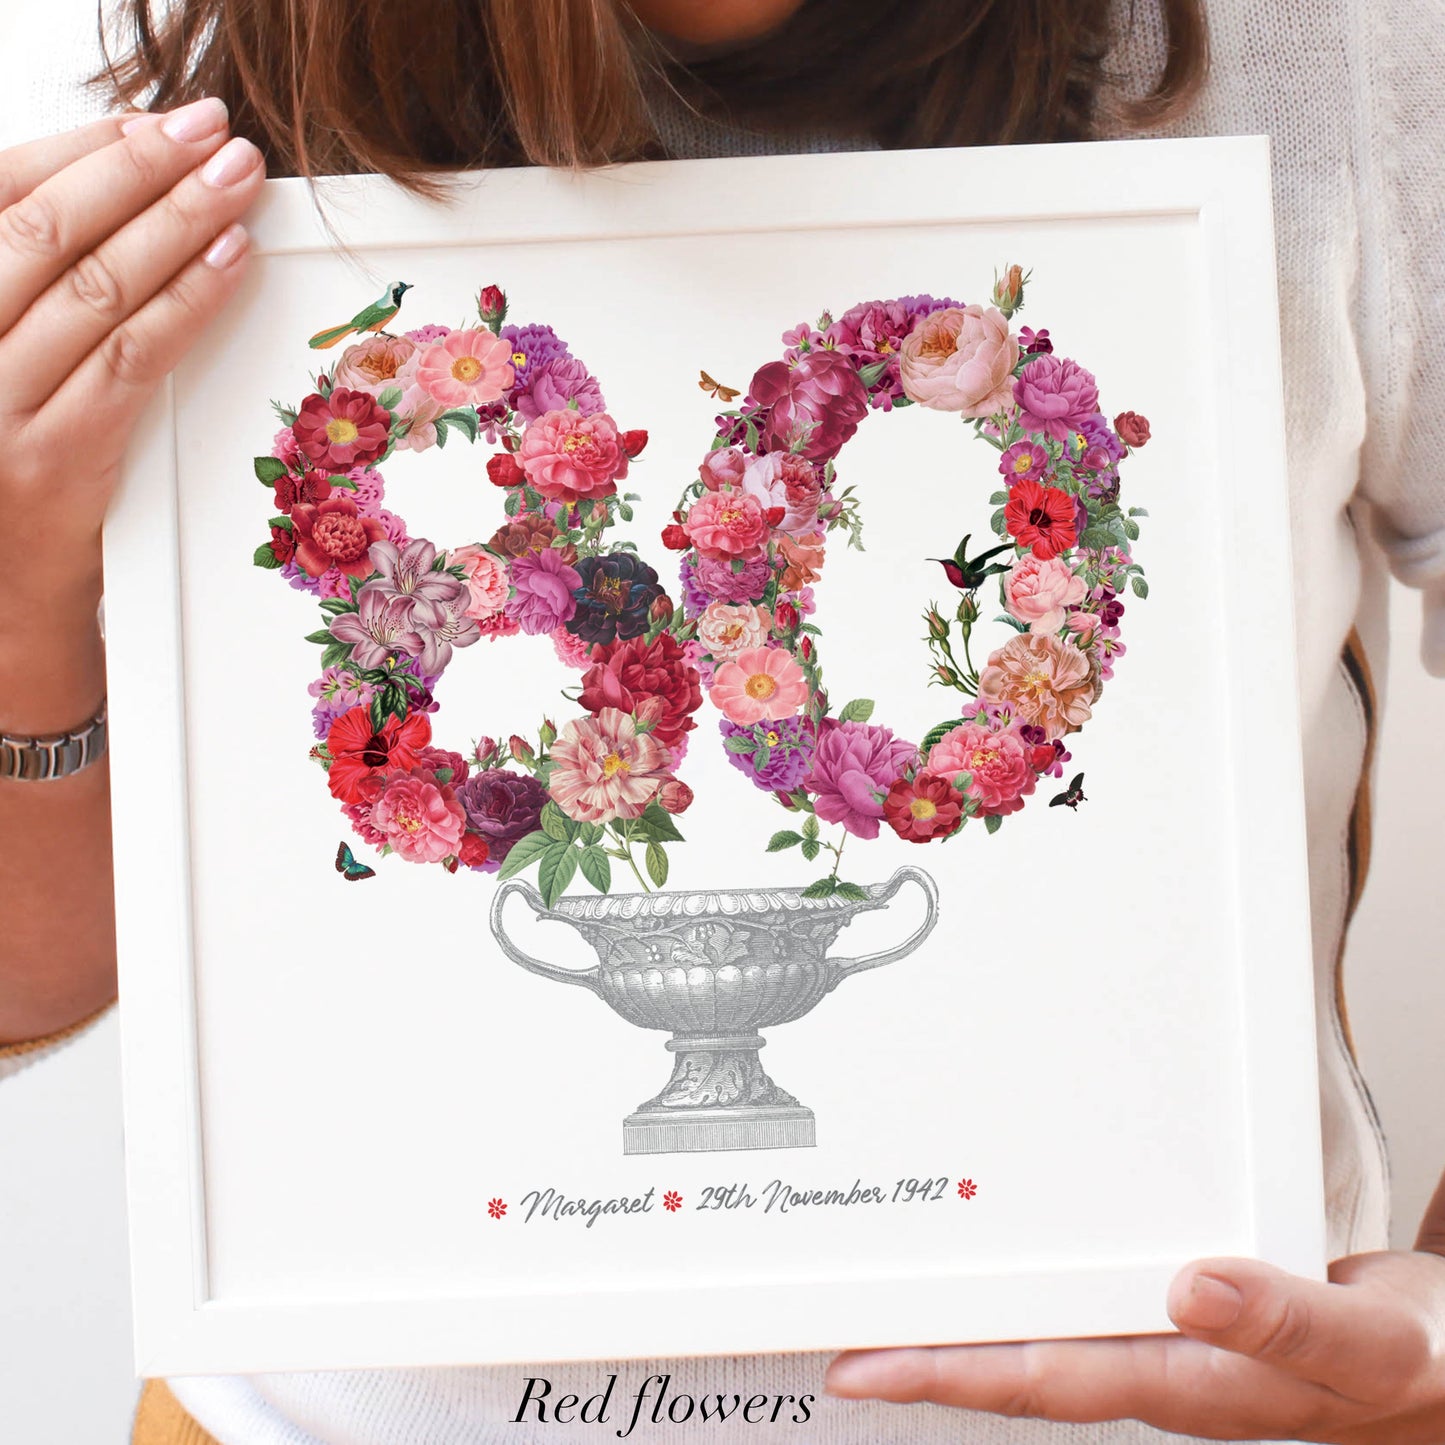 80th birthday gift with red flowers in an antique urn drawing in a white frame